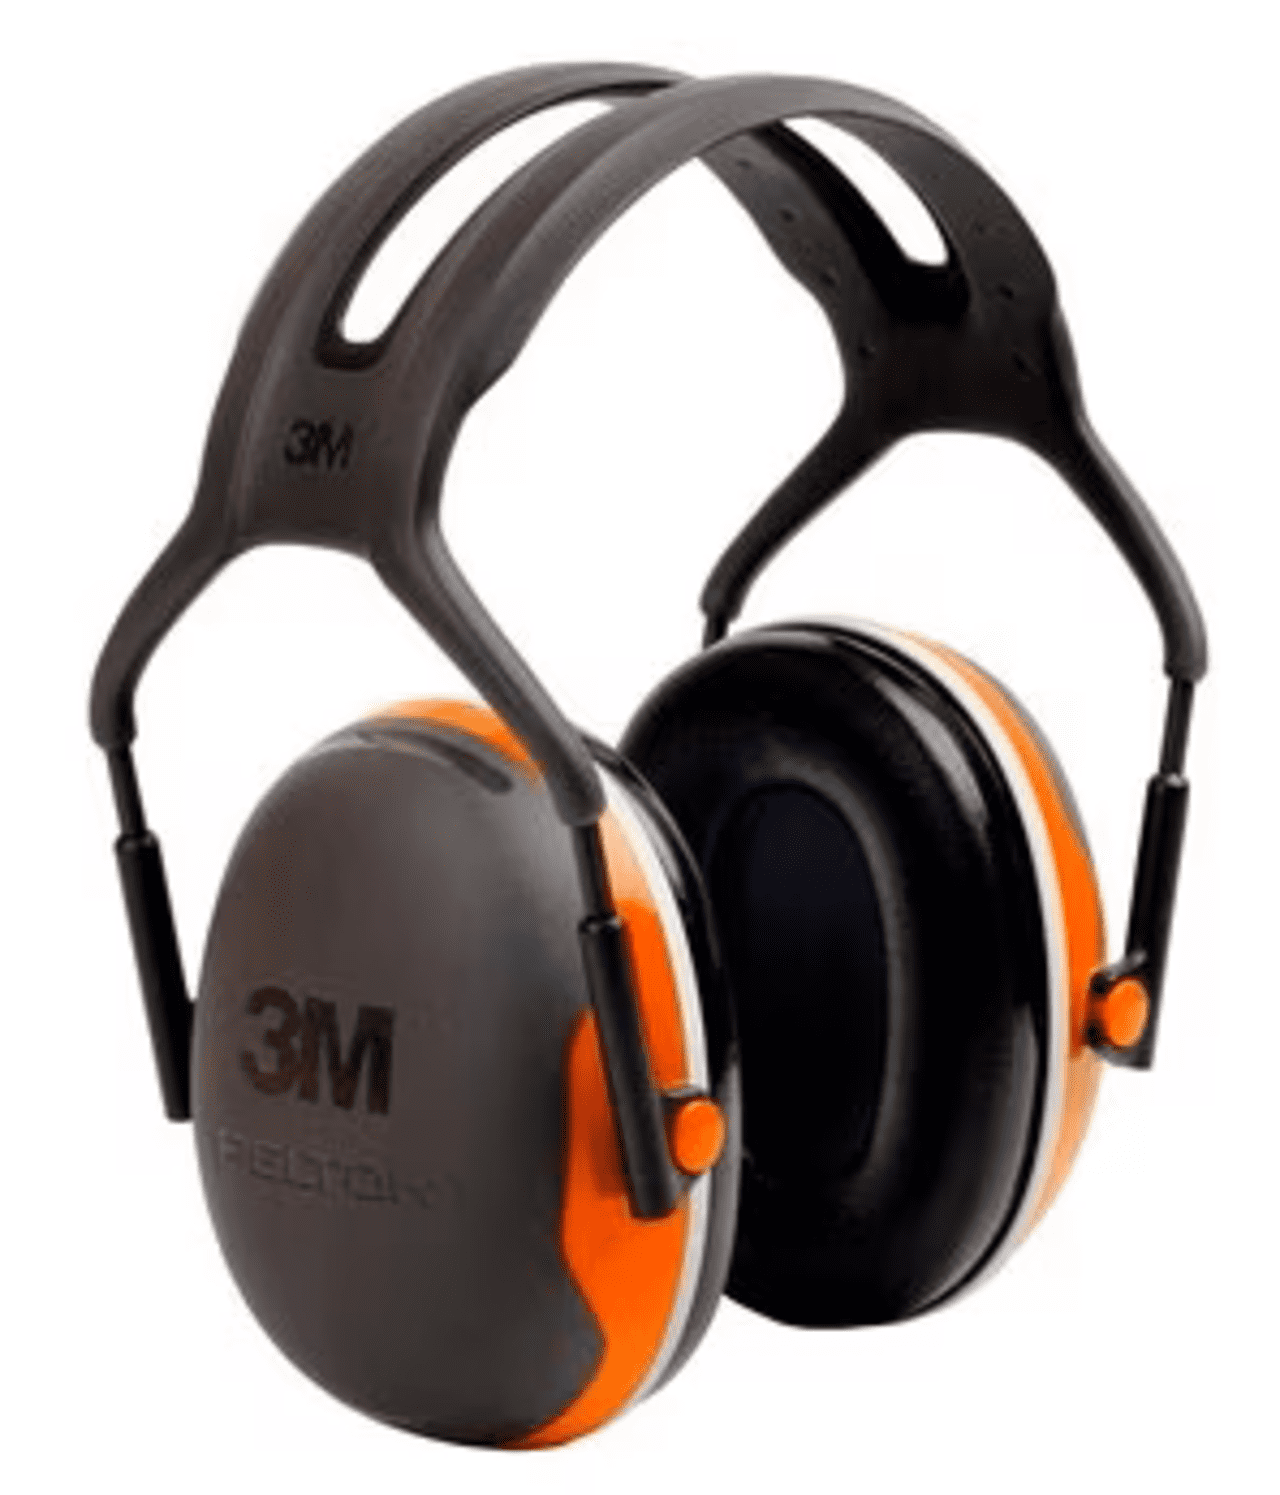 3M to recall about 40,000 noise-reducing earmuffs due to risk of overexposing user to loud noise